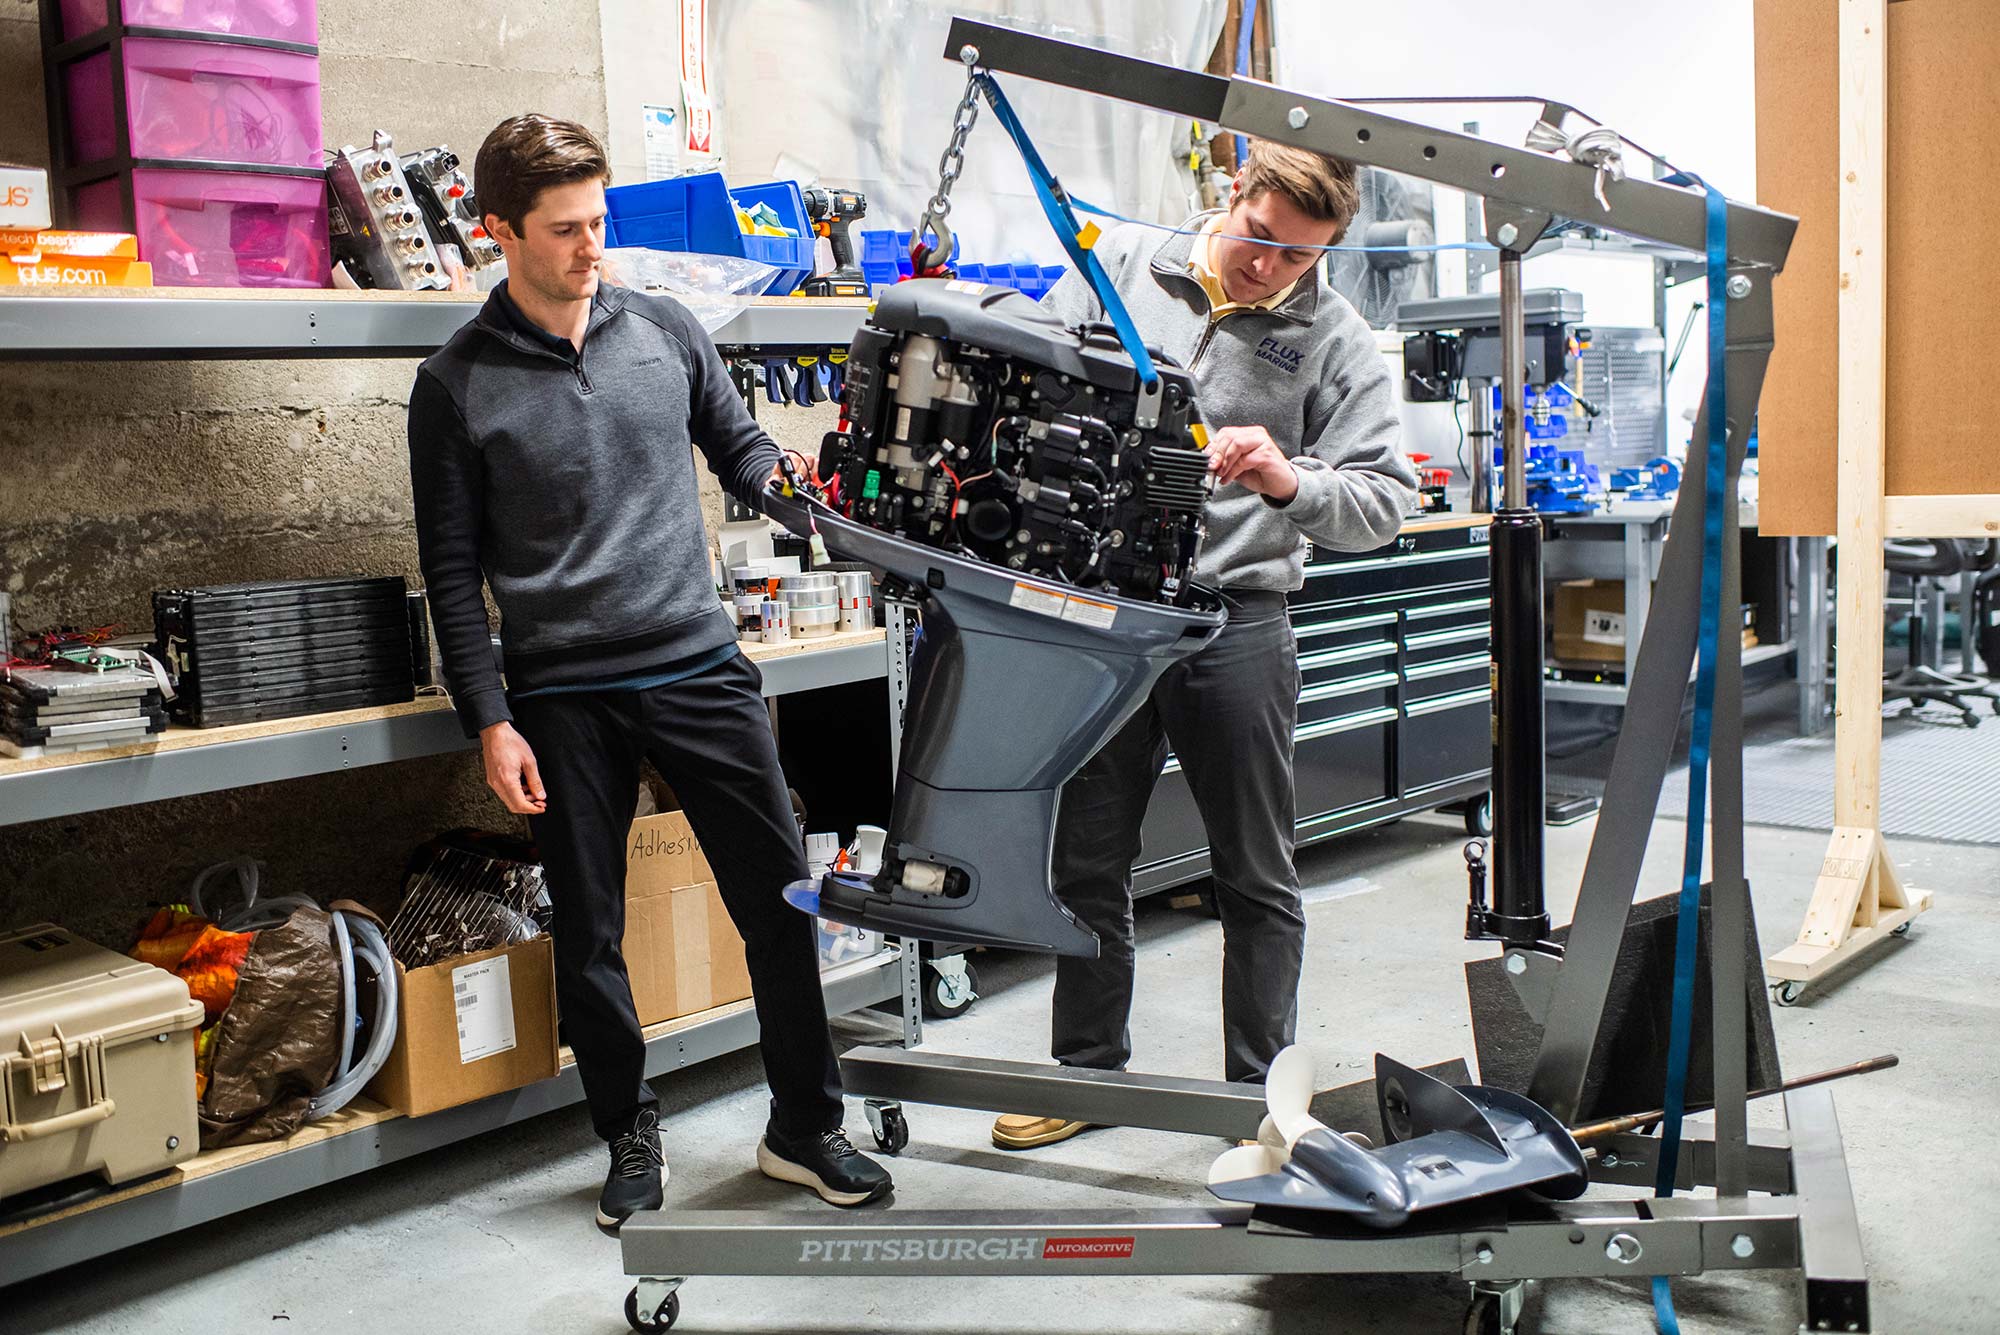 Photo of Daylin Frantin, left, in a gray long-sleeve and black pants, with one hand on a boat engine, while Sam Gallipeau, Flux’s in-house designer, in a gray quarter zip, inspects the other side of the engine. Behind them are work benches and industrial shelves. A small crane lifts the engine